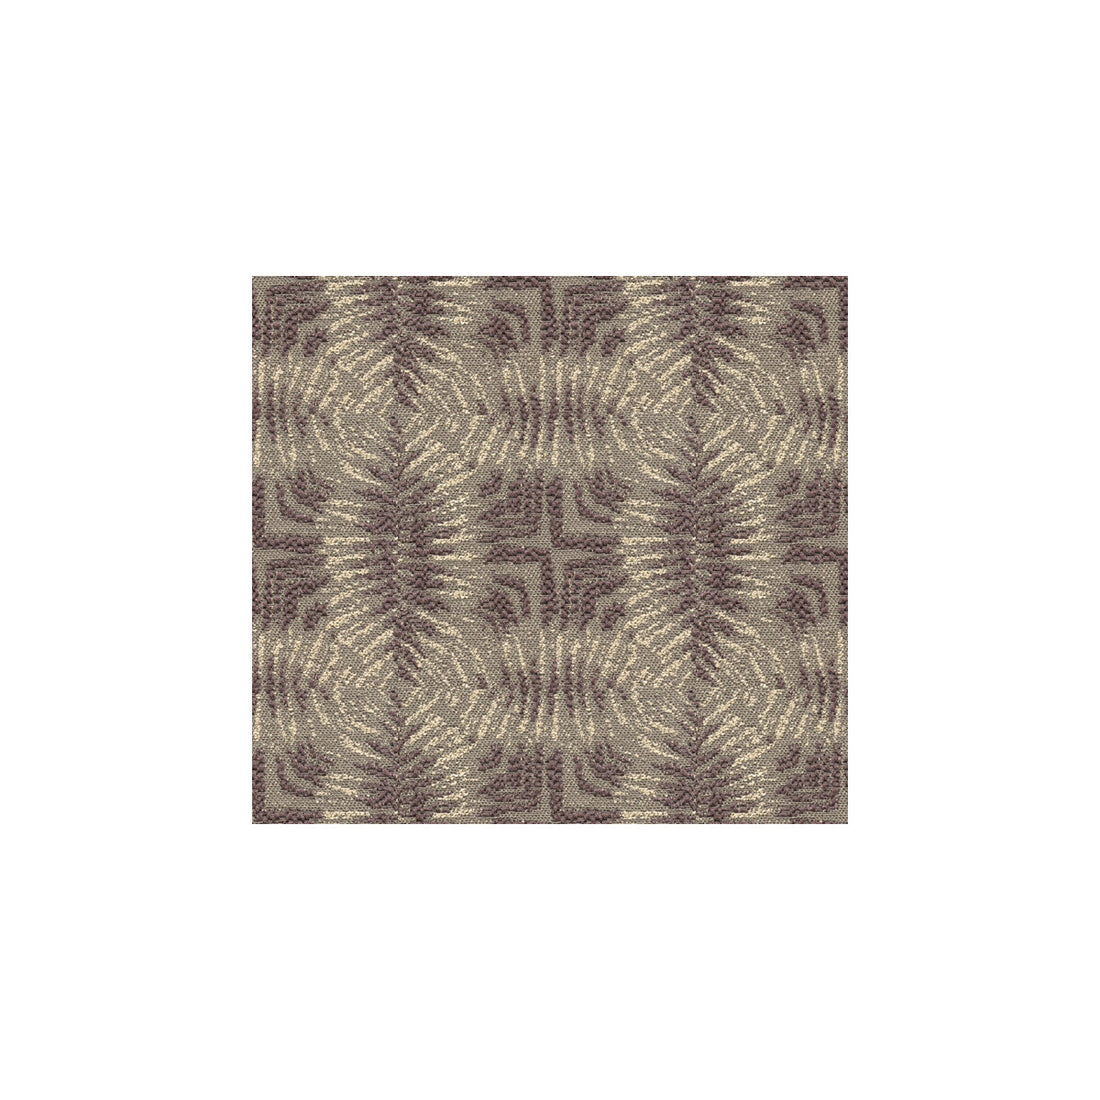 Calypso fabric in mauve color - pattern GWF-3204.10.0 - by Lee Jofa Modern in the Allegra Hicks Islands collection